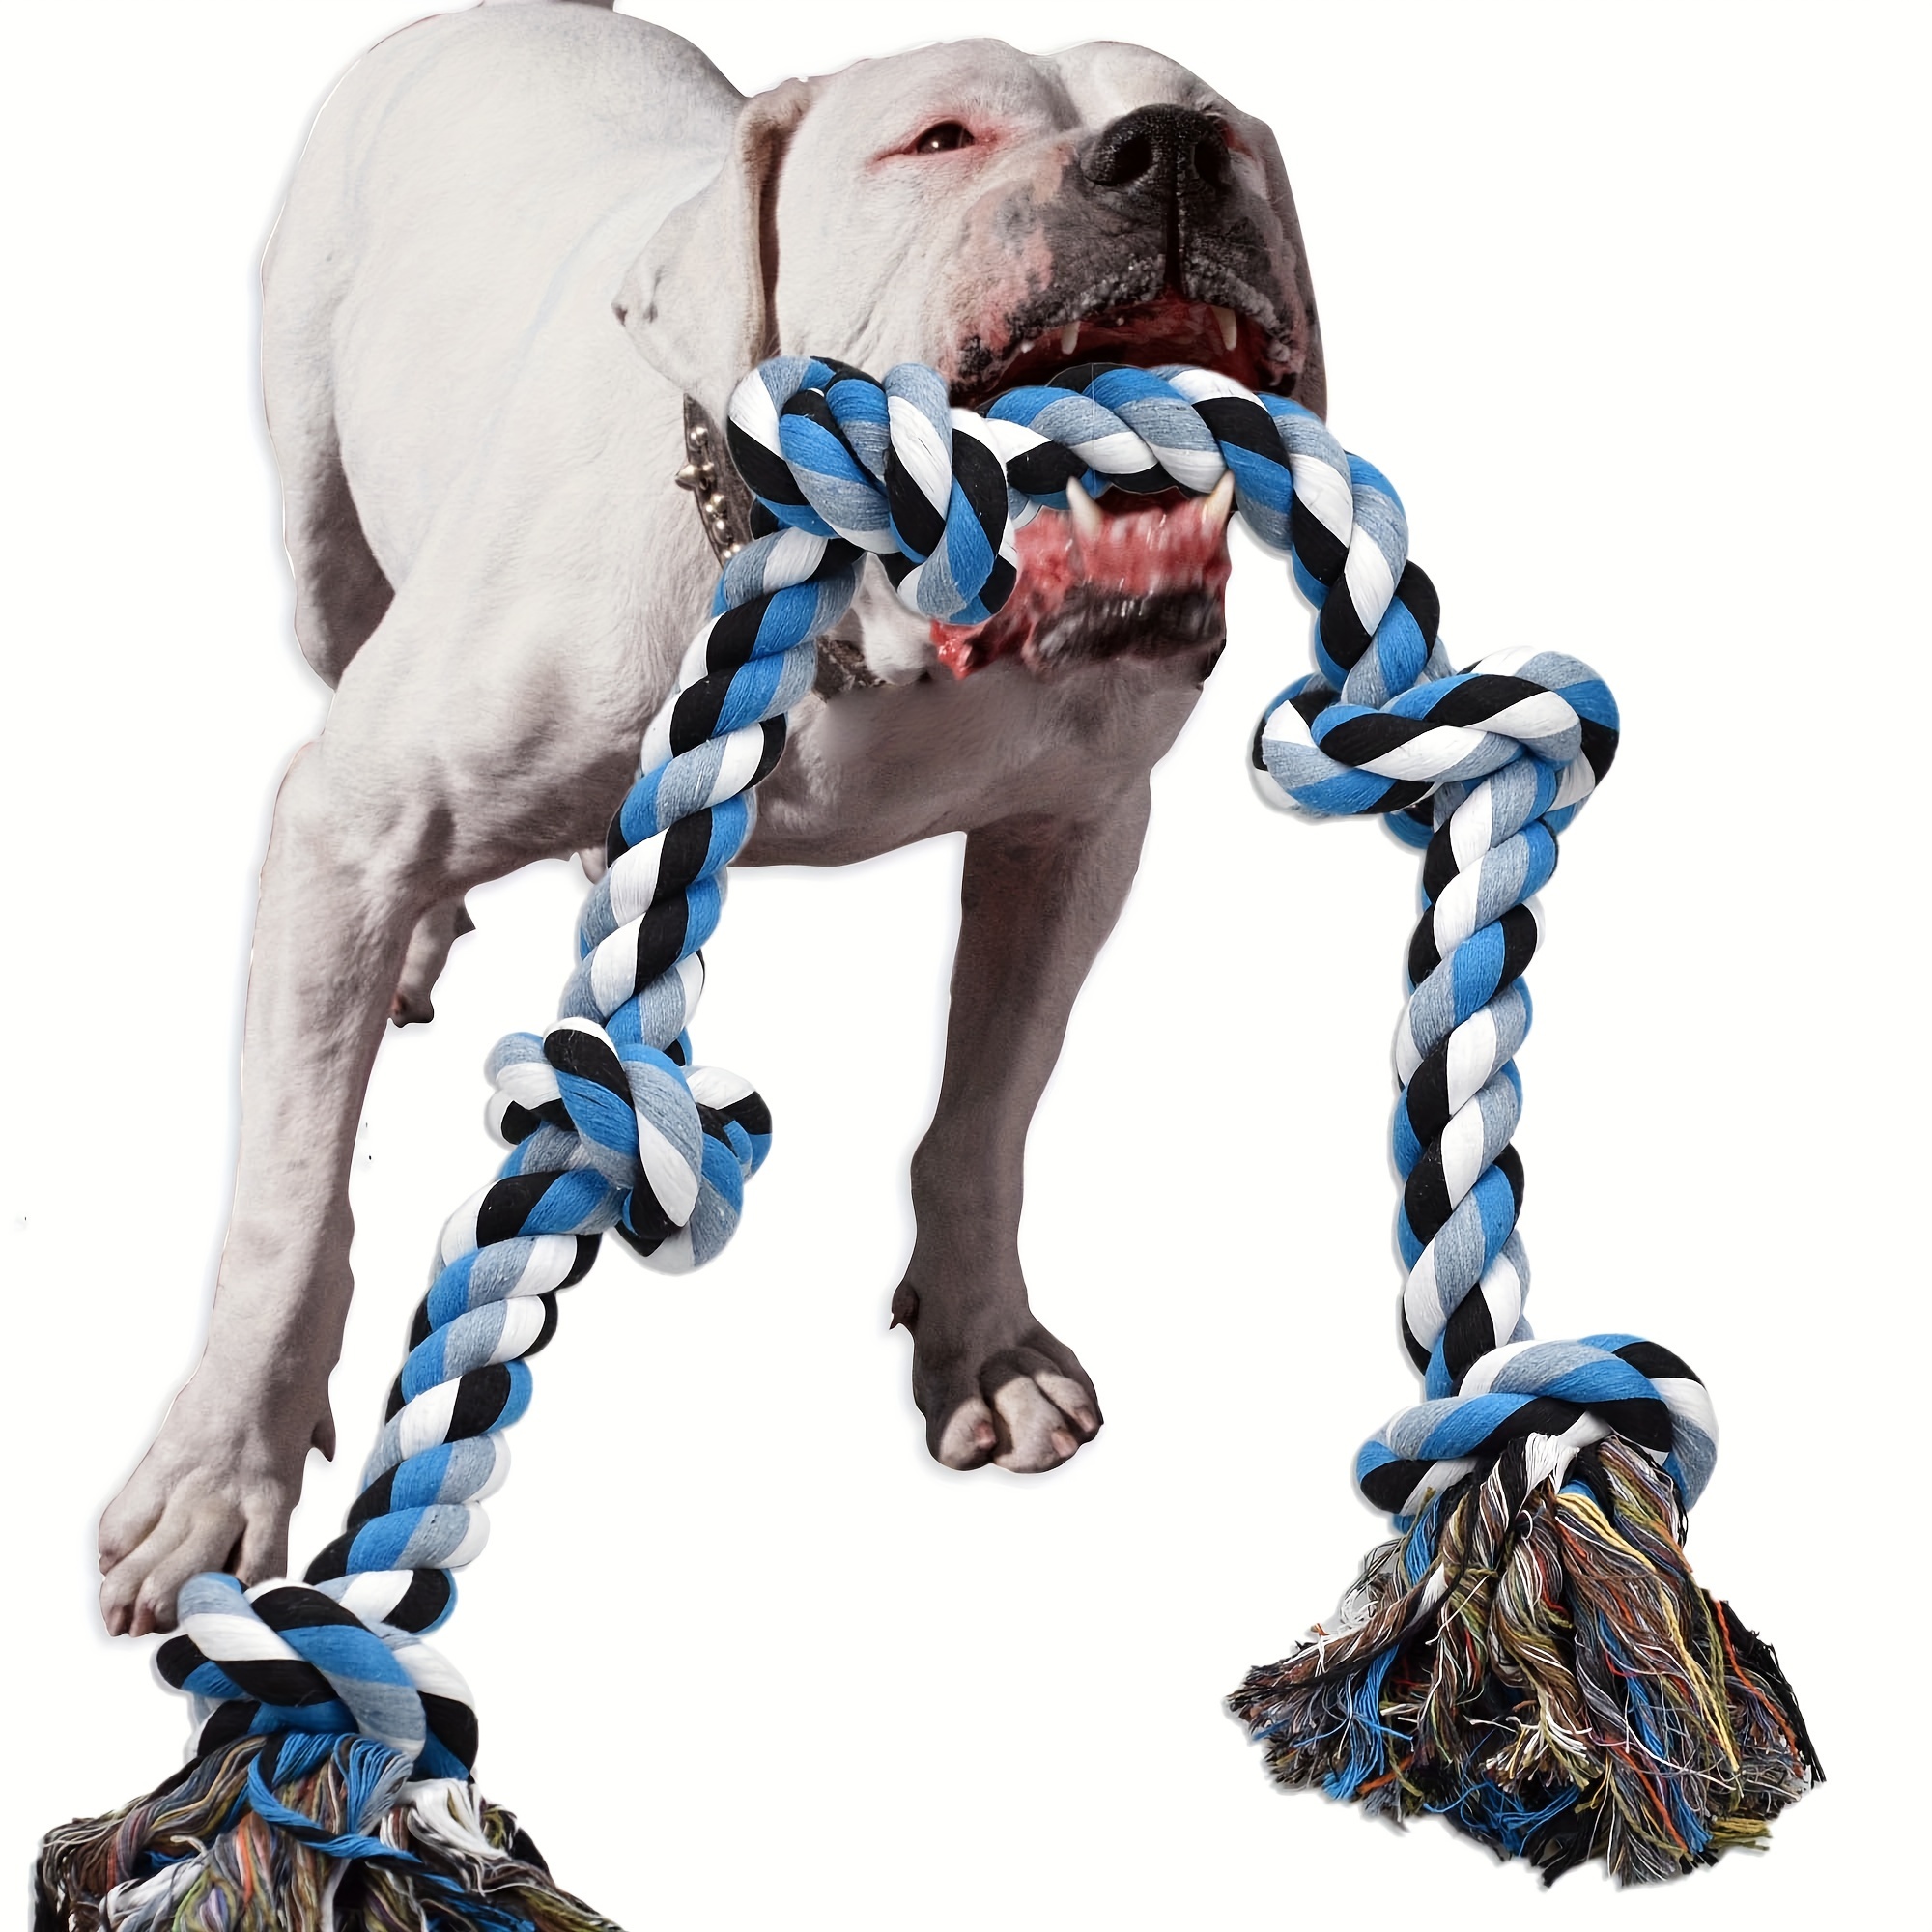 

Heavy Duty Cotton Blend Rope Toy For Large Dogs, Aggressive Chewers - Tug Of War And Teeth Cleaning Toy For Large Breeds